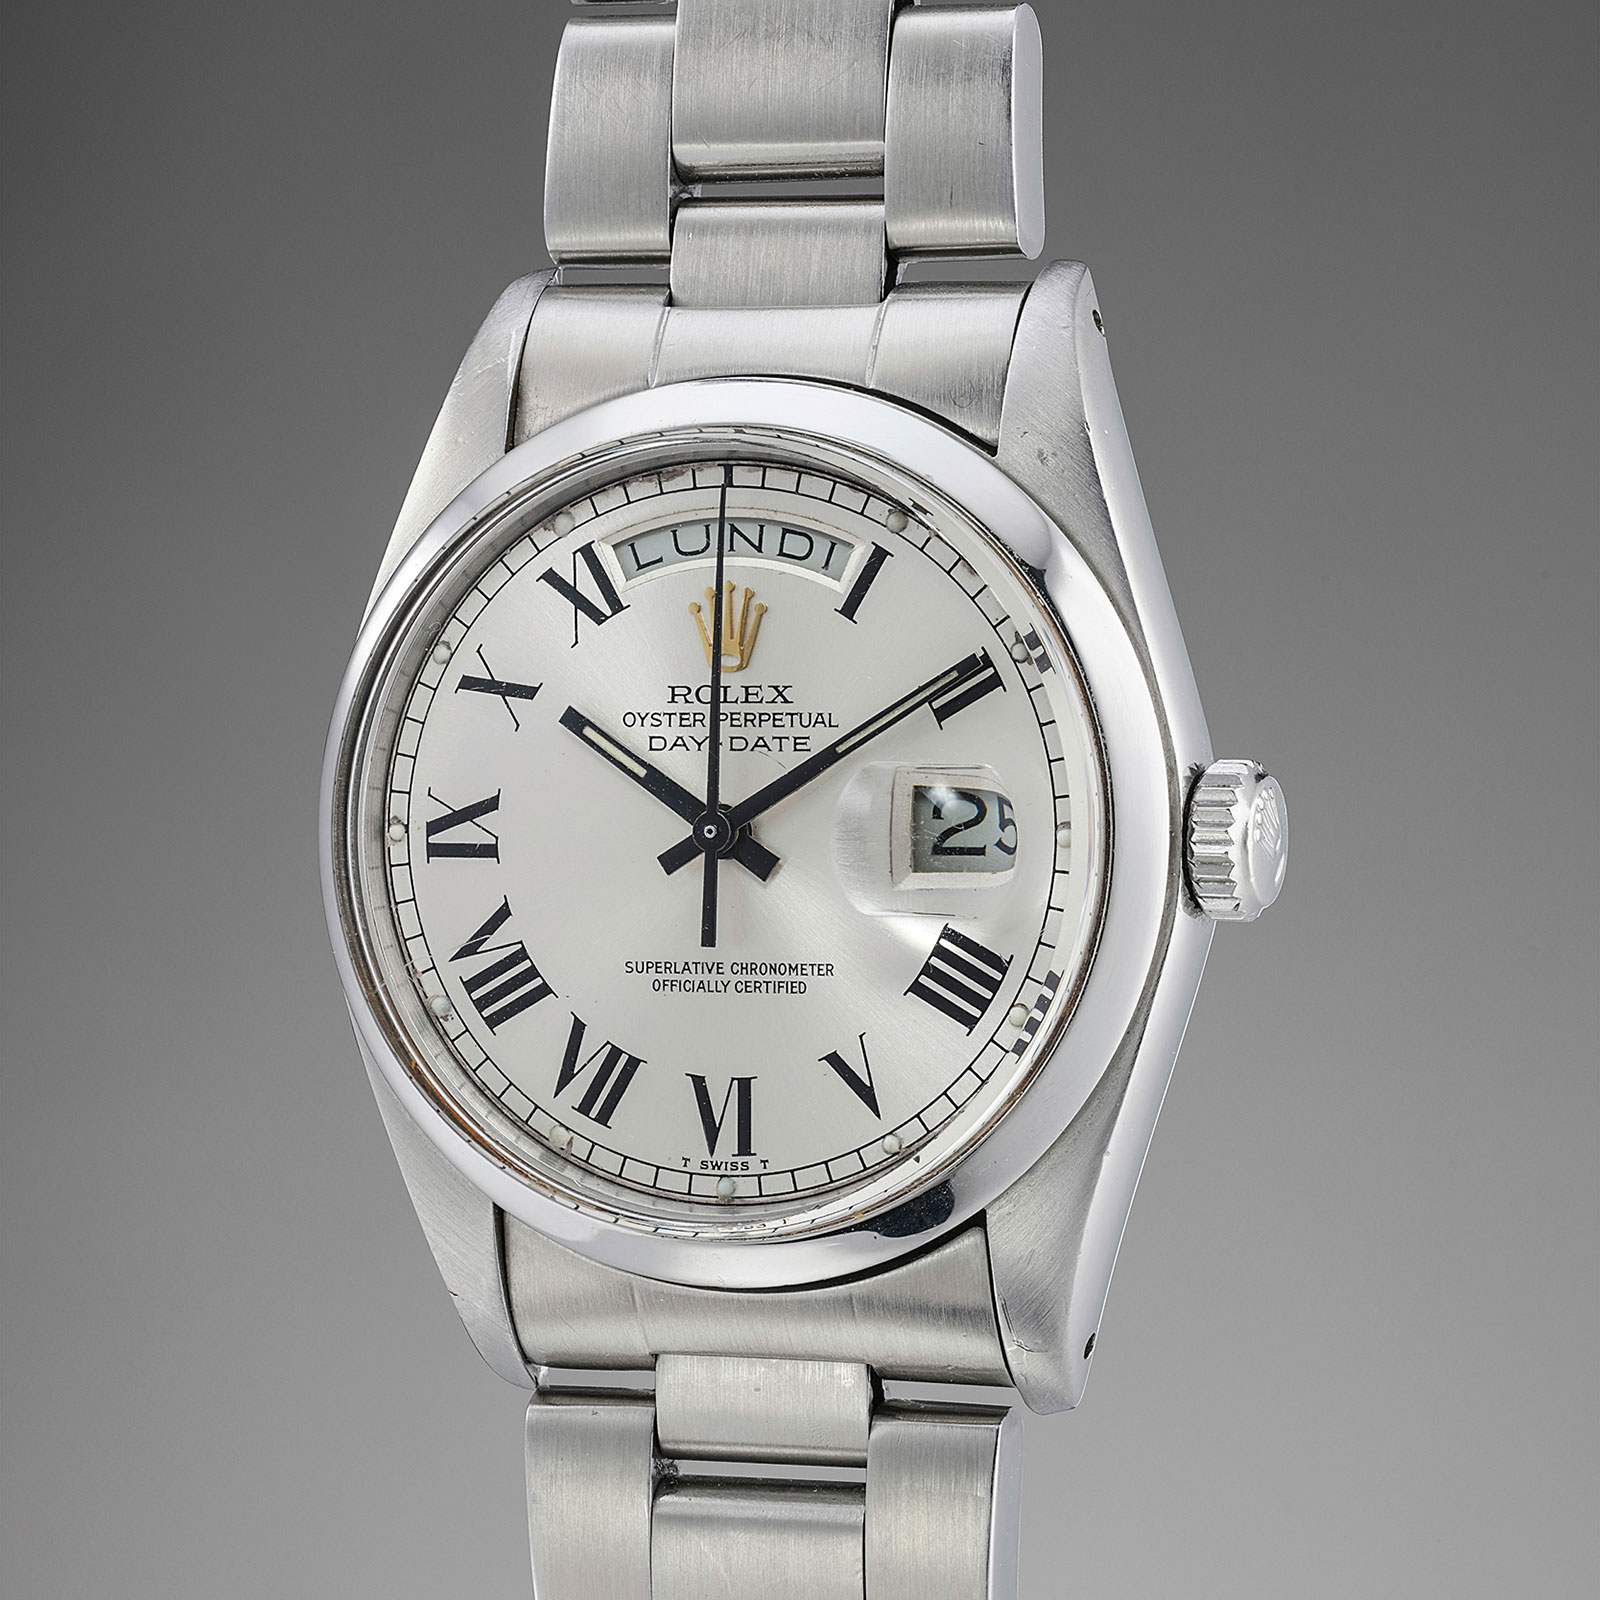 Rolex Day Date stainless steel phillips 1